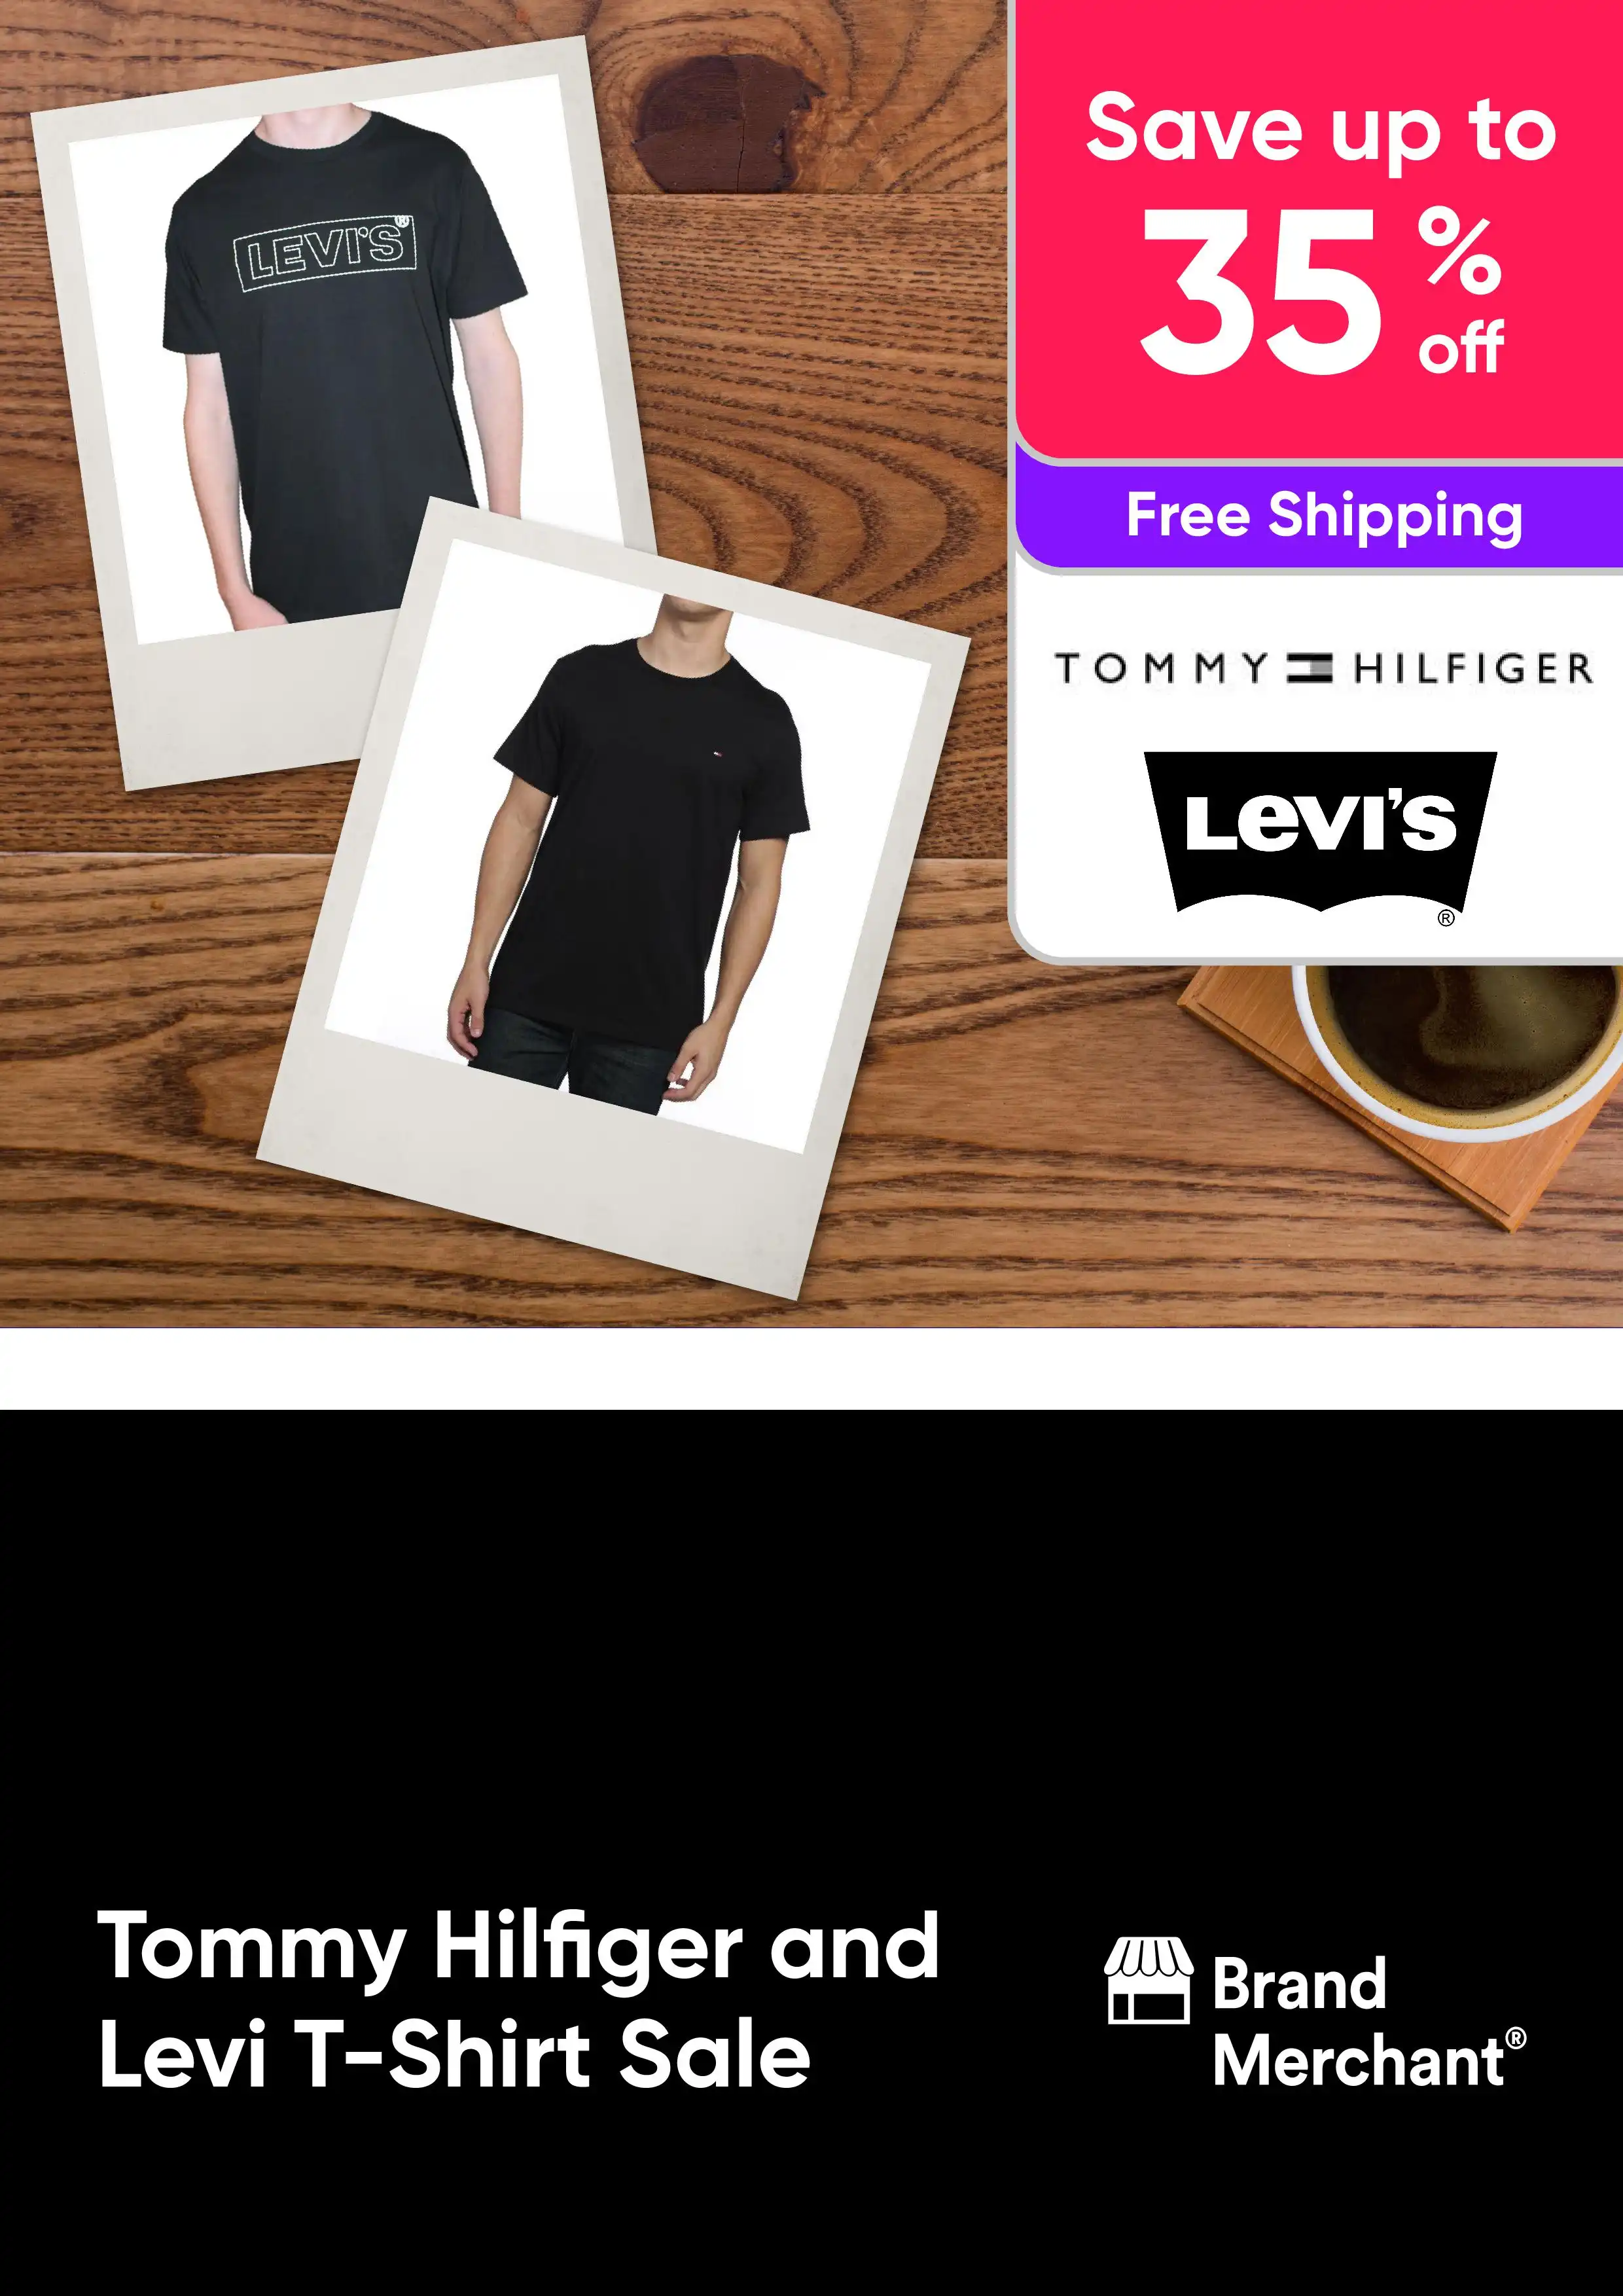 Tommy Hilfiger and Levi's T-Shirt Sale - Up to 35% Off